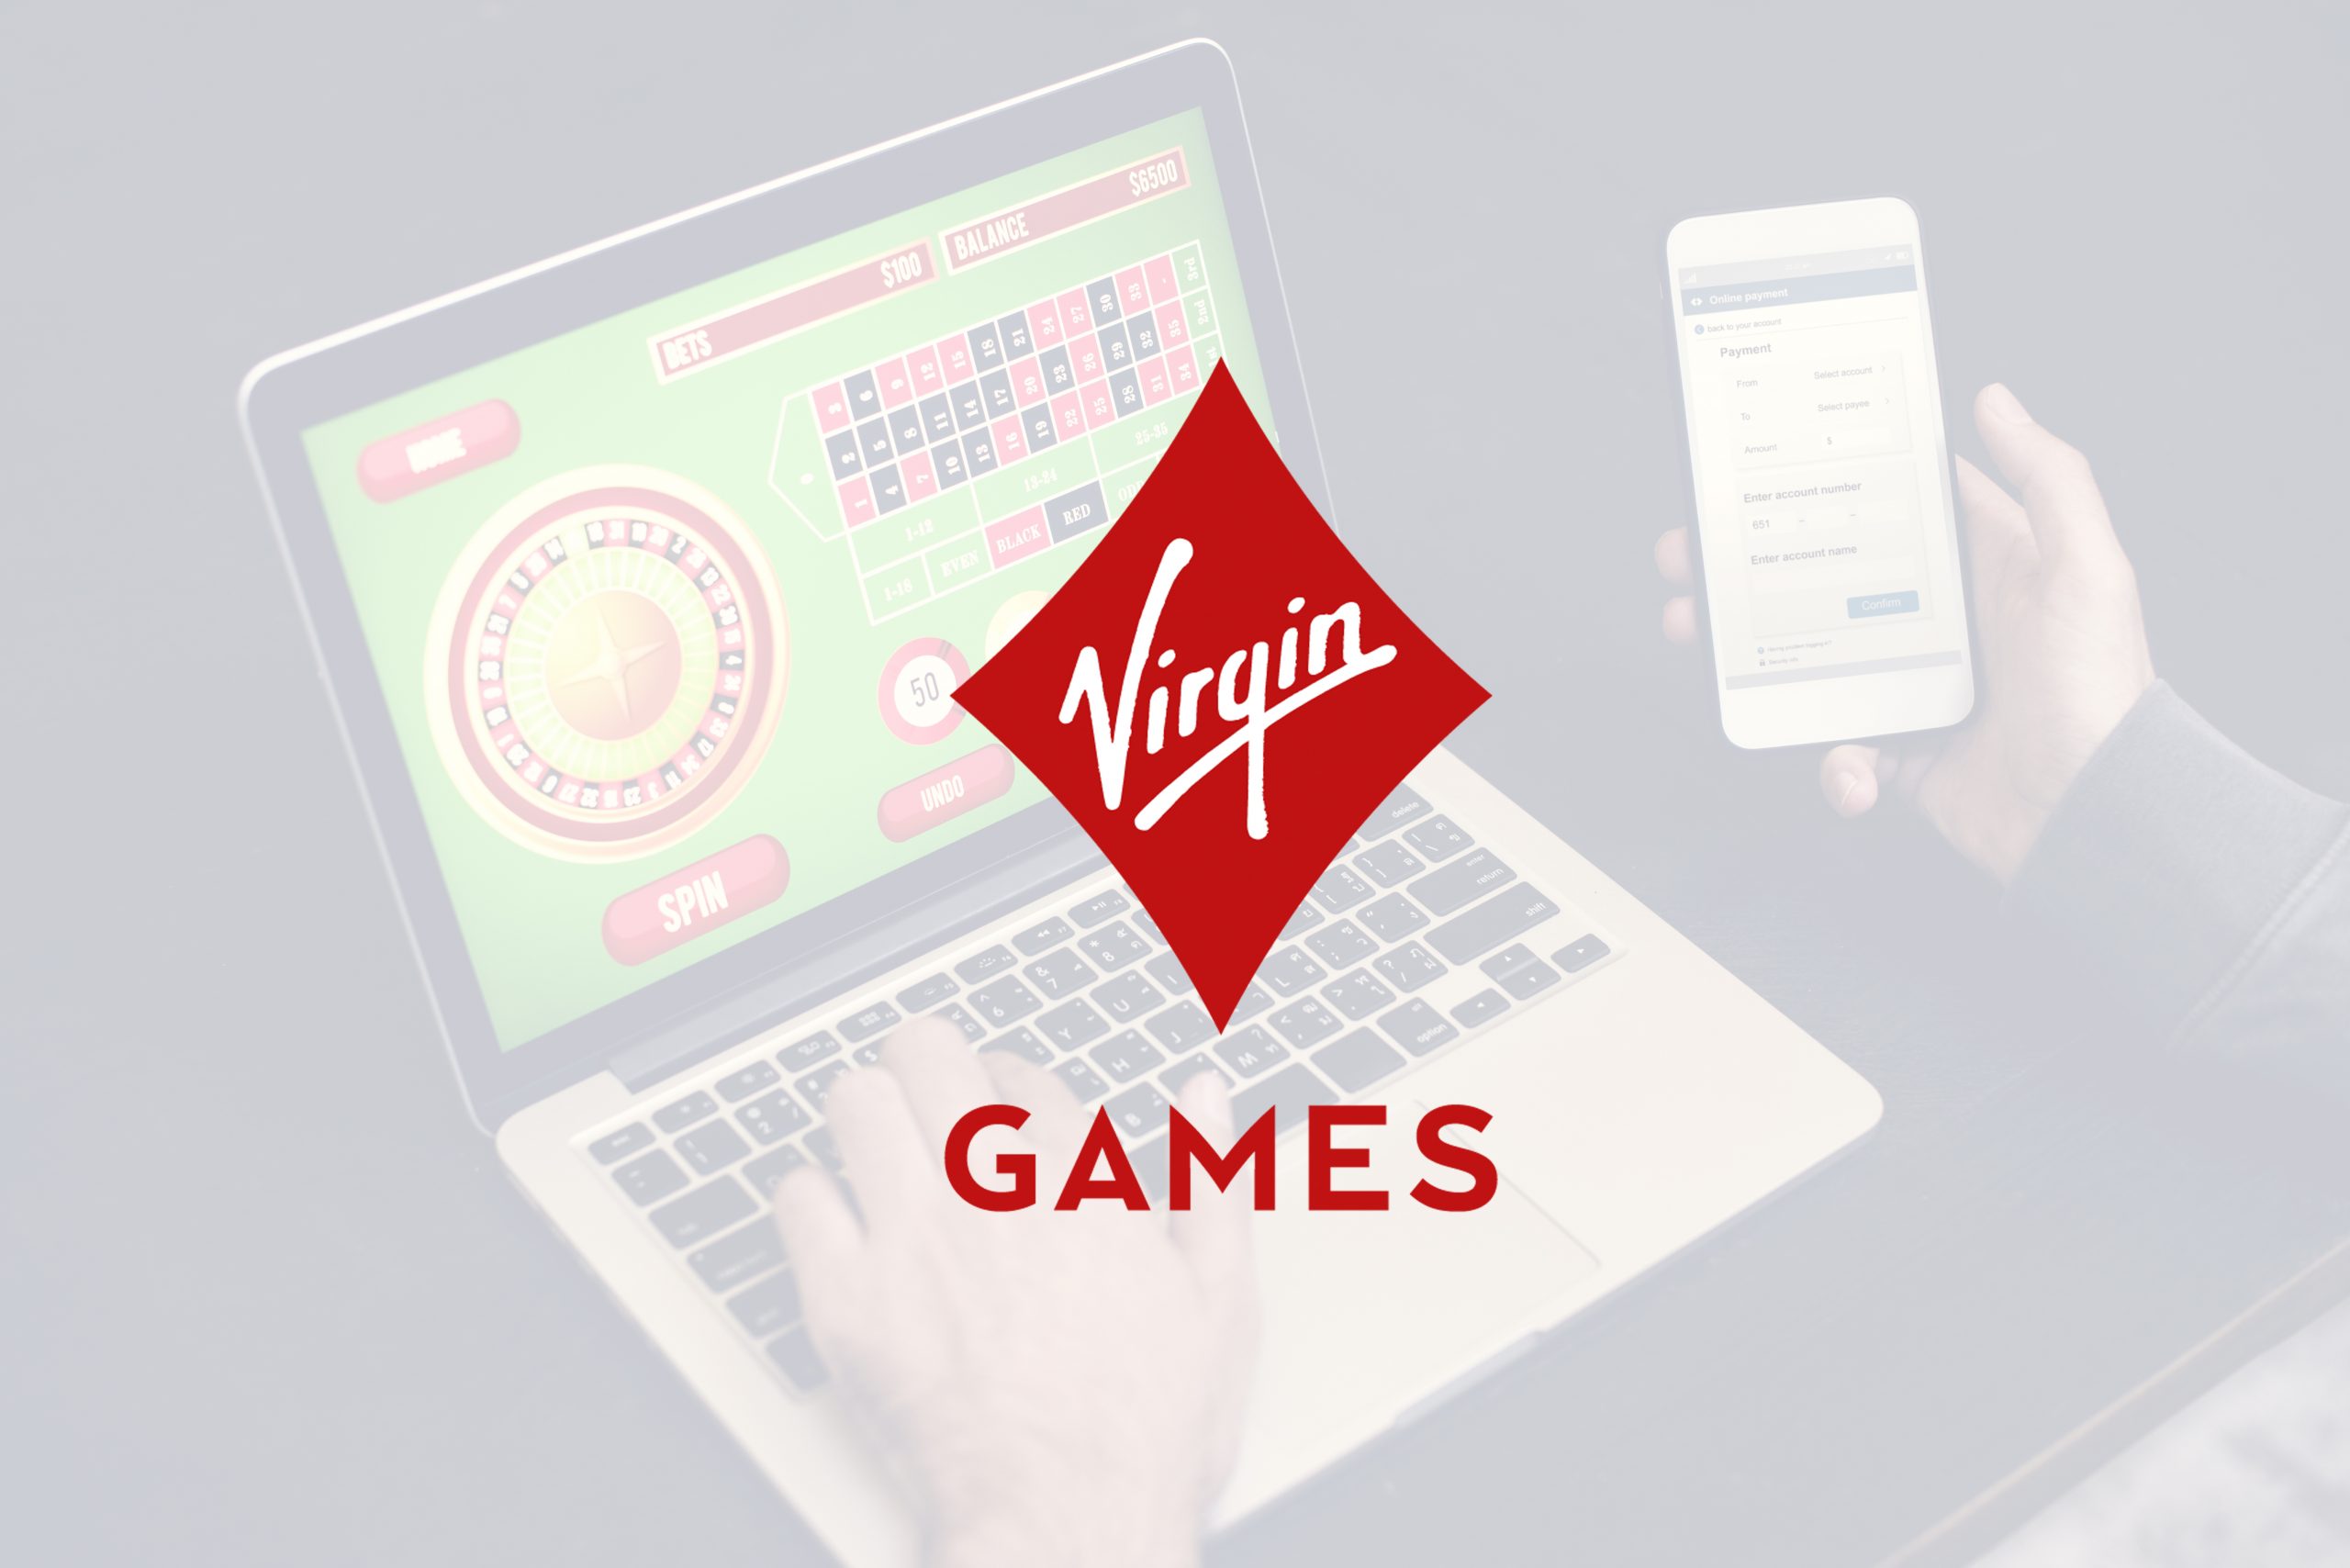 How To Choose The Right Game On Virgin Games?